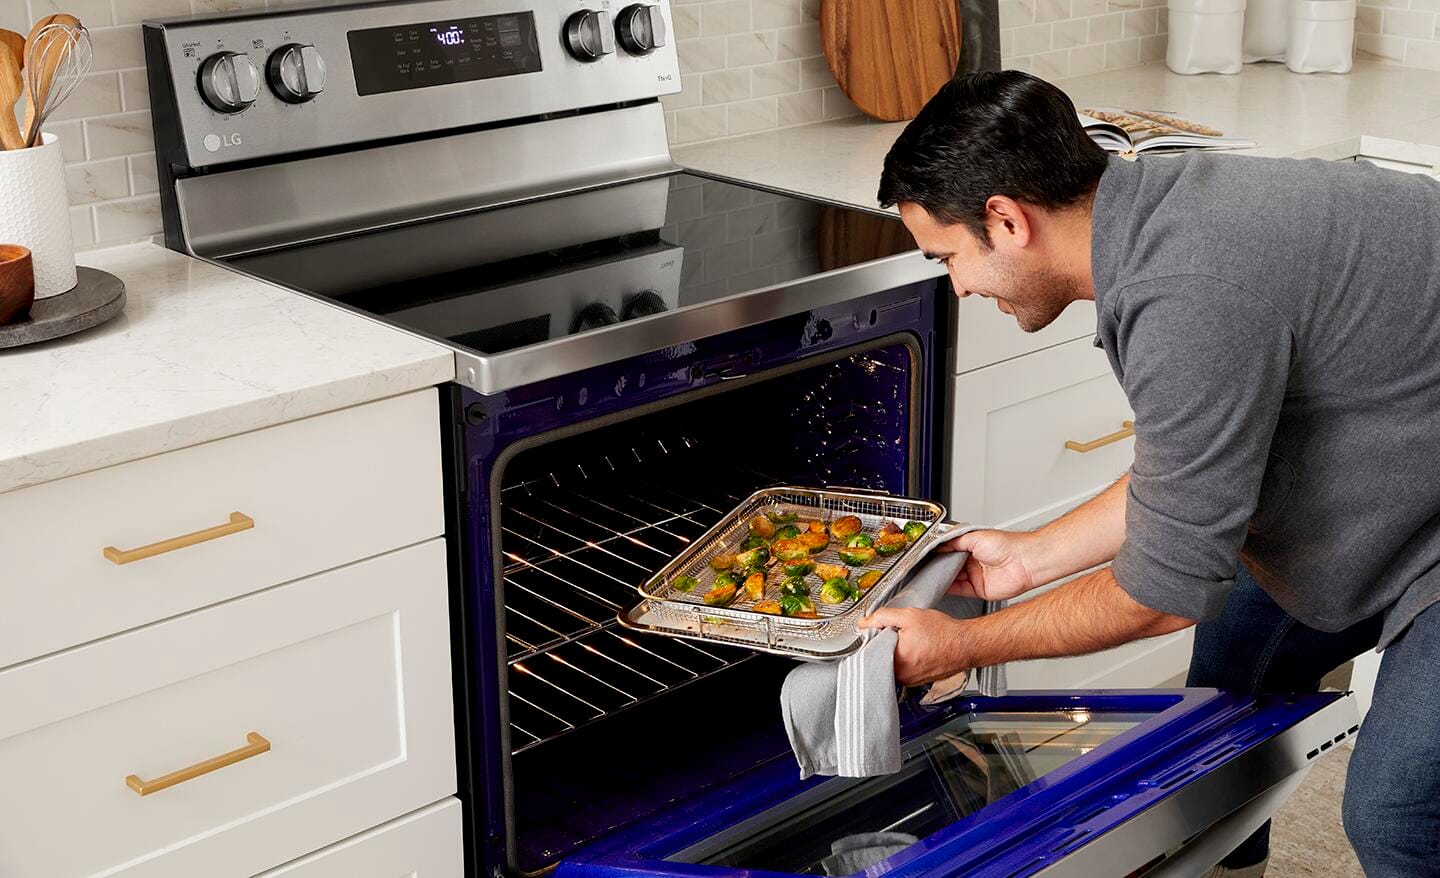 A person takes out a tray of food from a convection oven with an air fry capability.